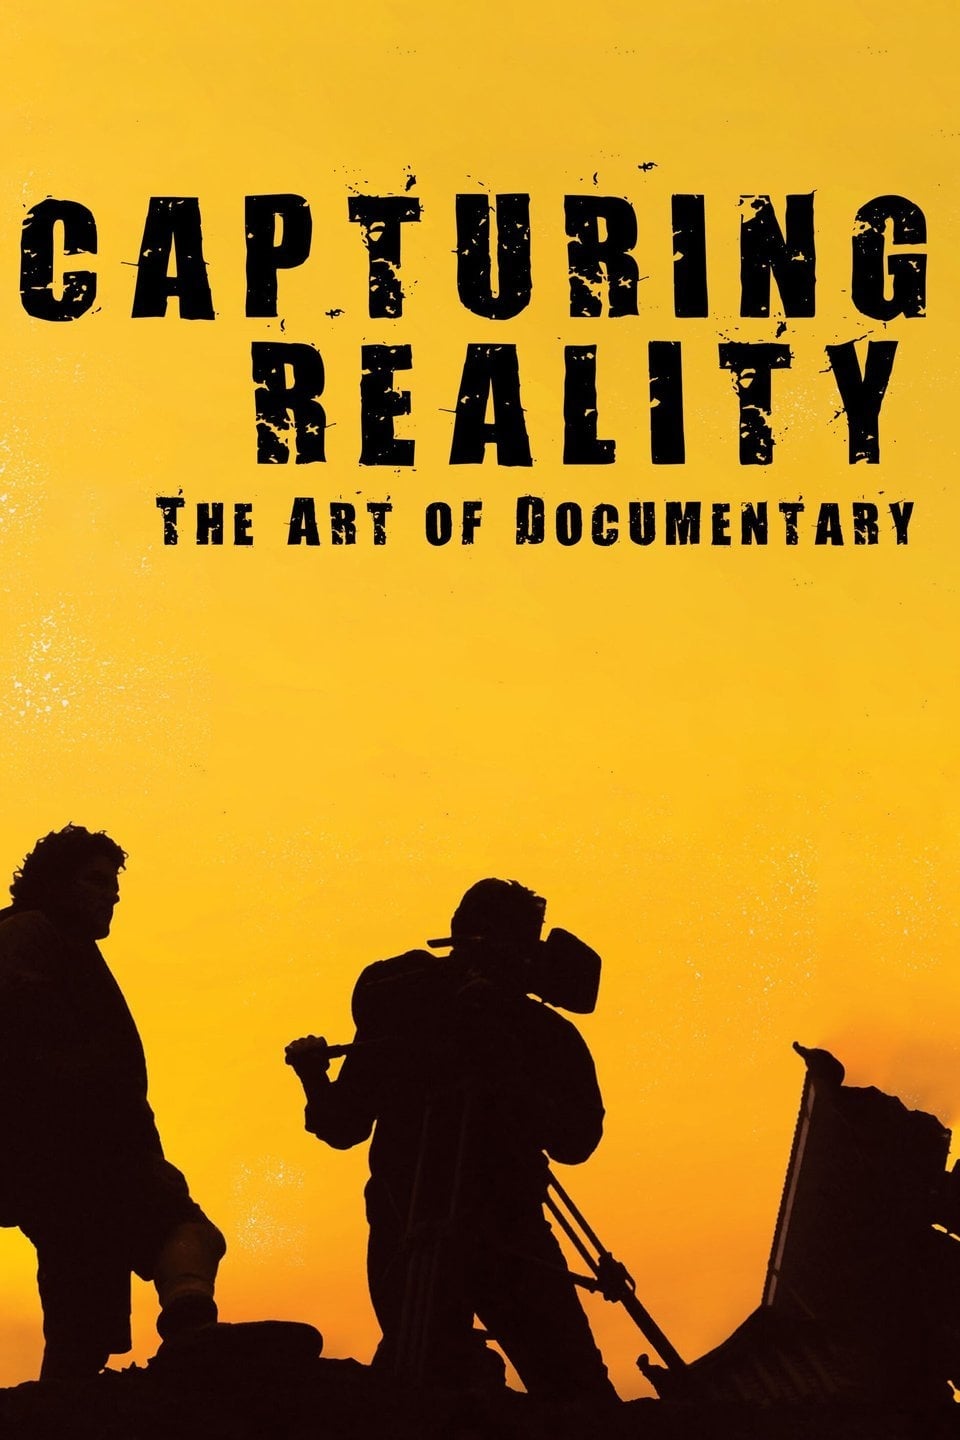 Capturing Reality (2008)